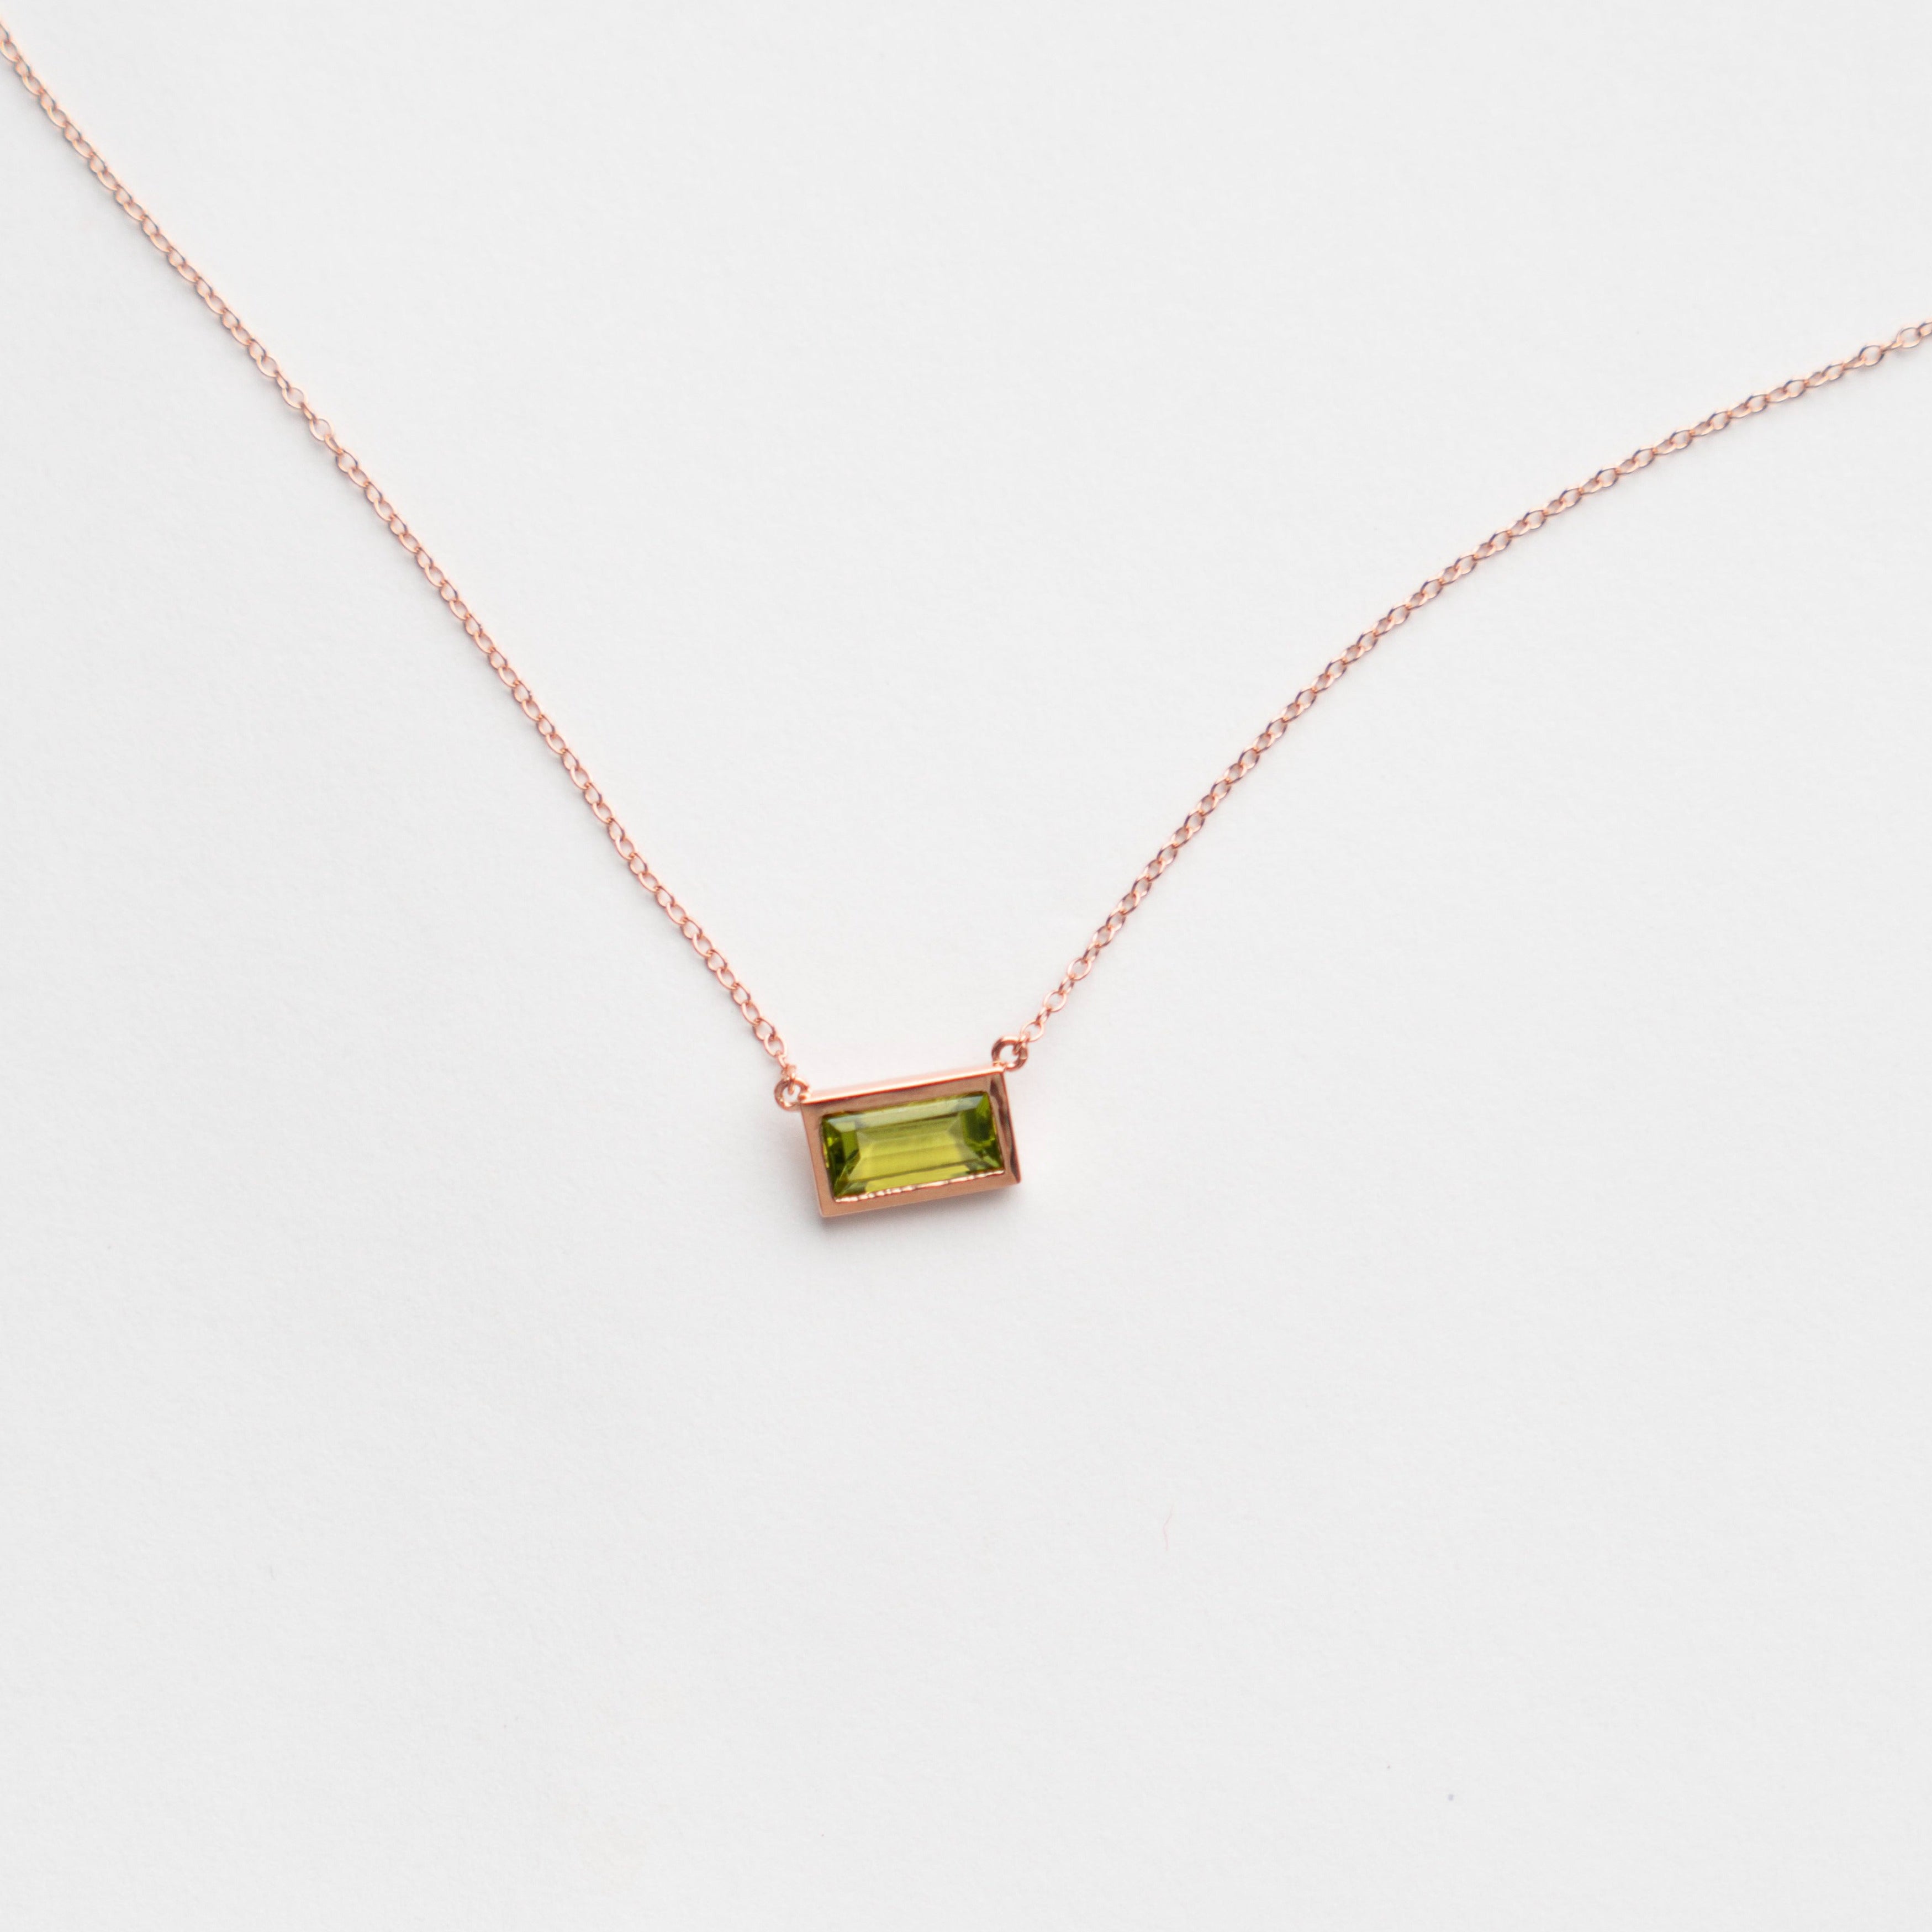 Minimalistic Didi necklace in 14k gold set with peridot ethical made in New York City by SHW fine Jewelry